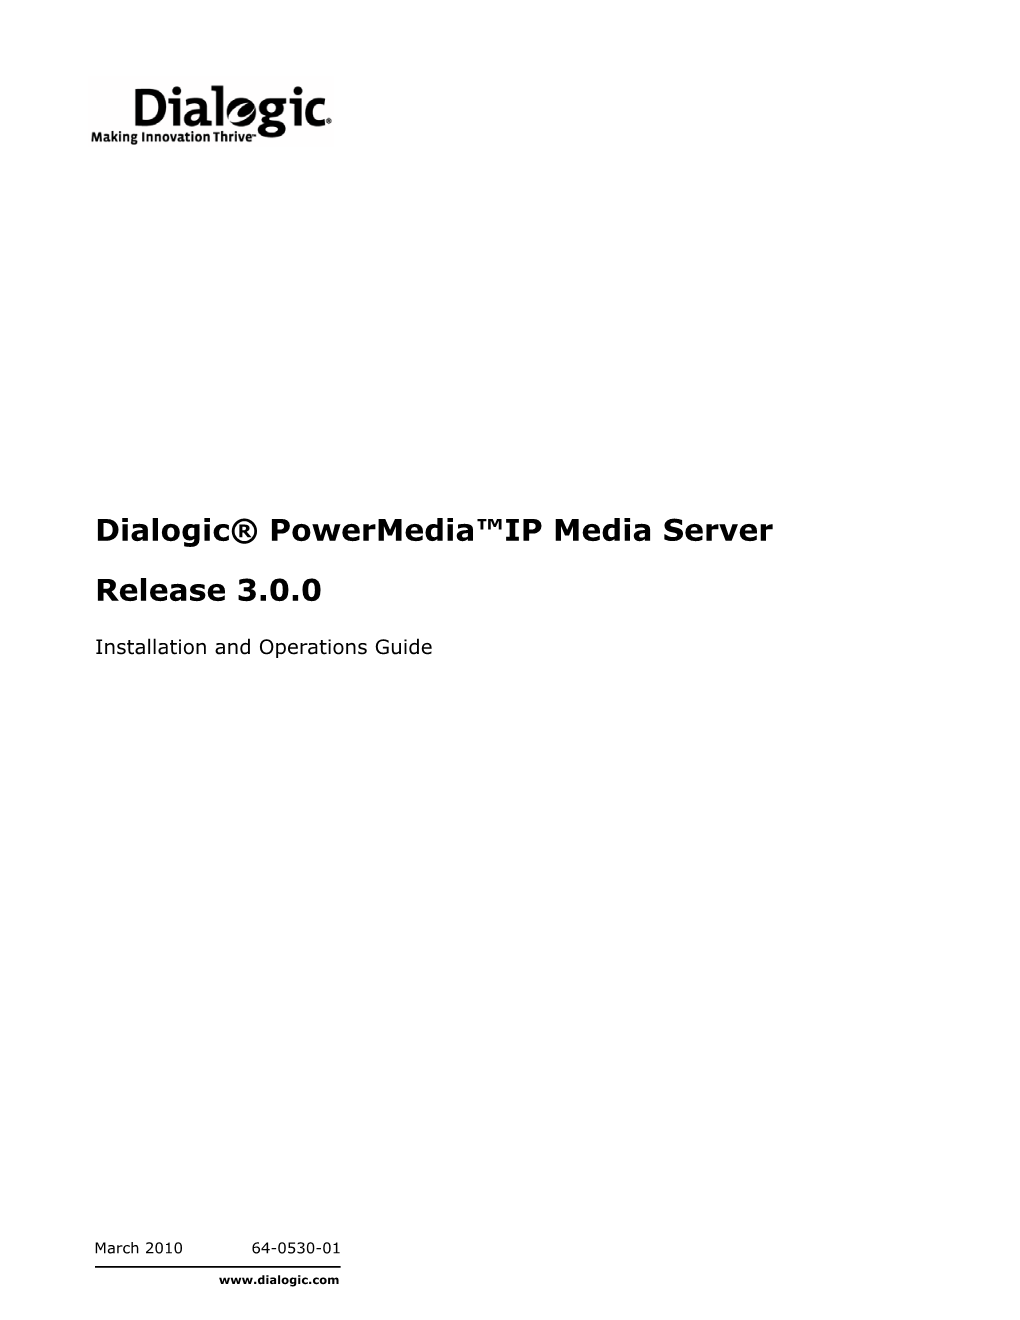 Dialogic IP Media Server Installation and Operations Guide